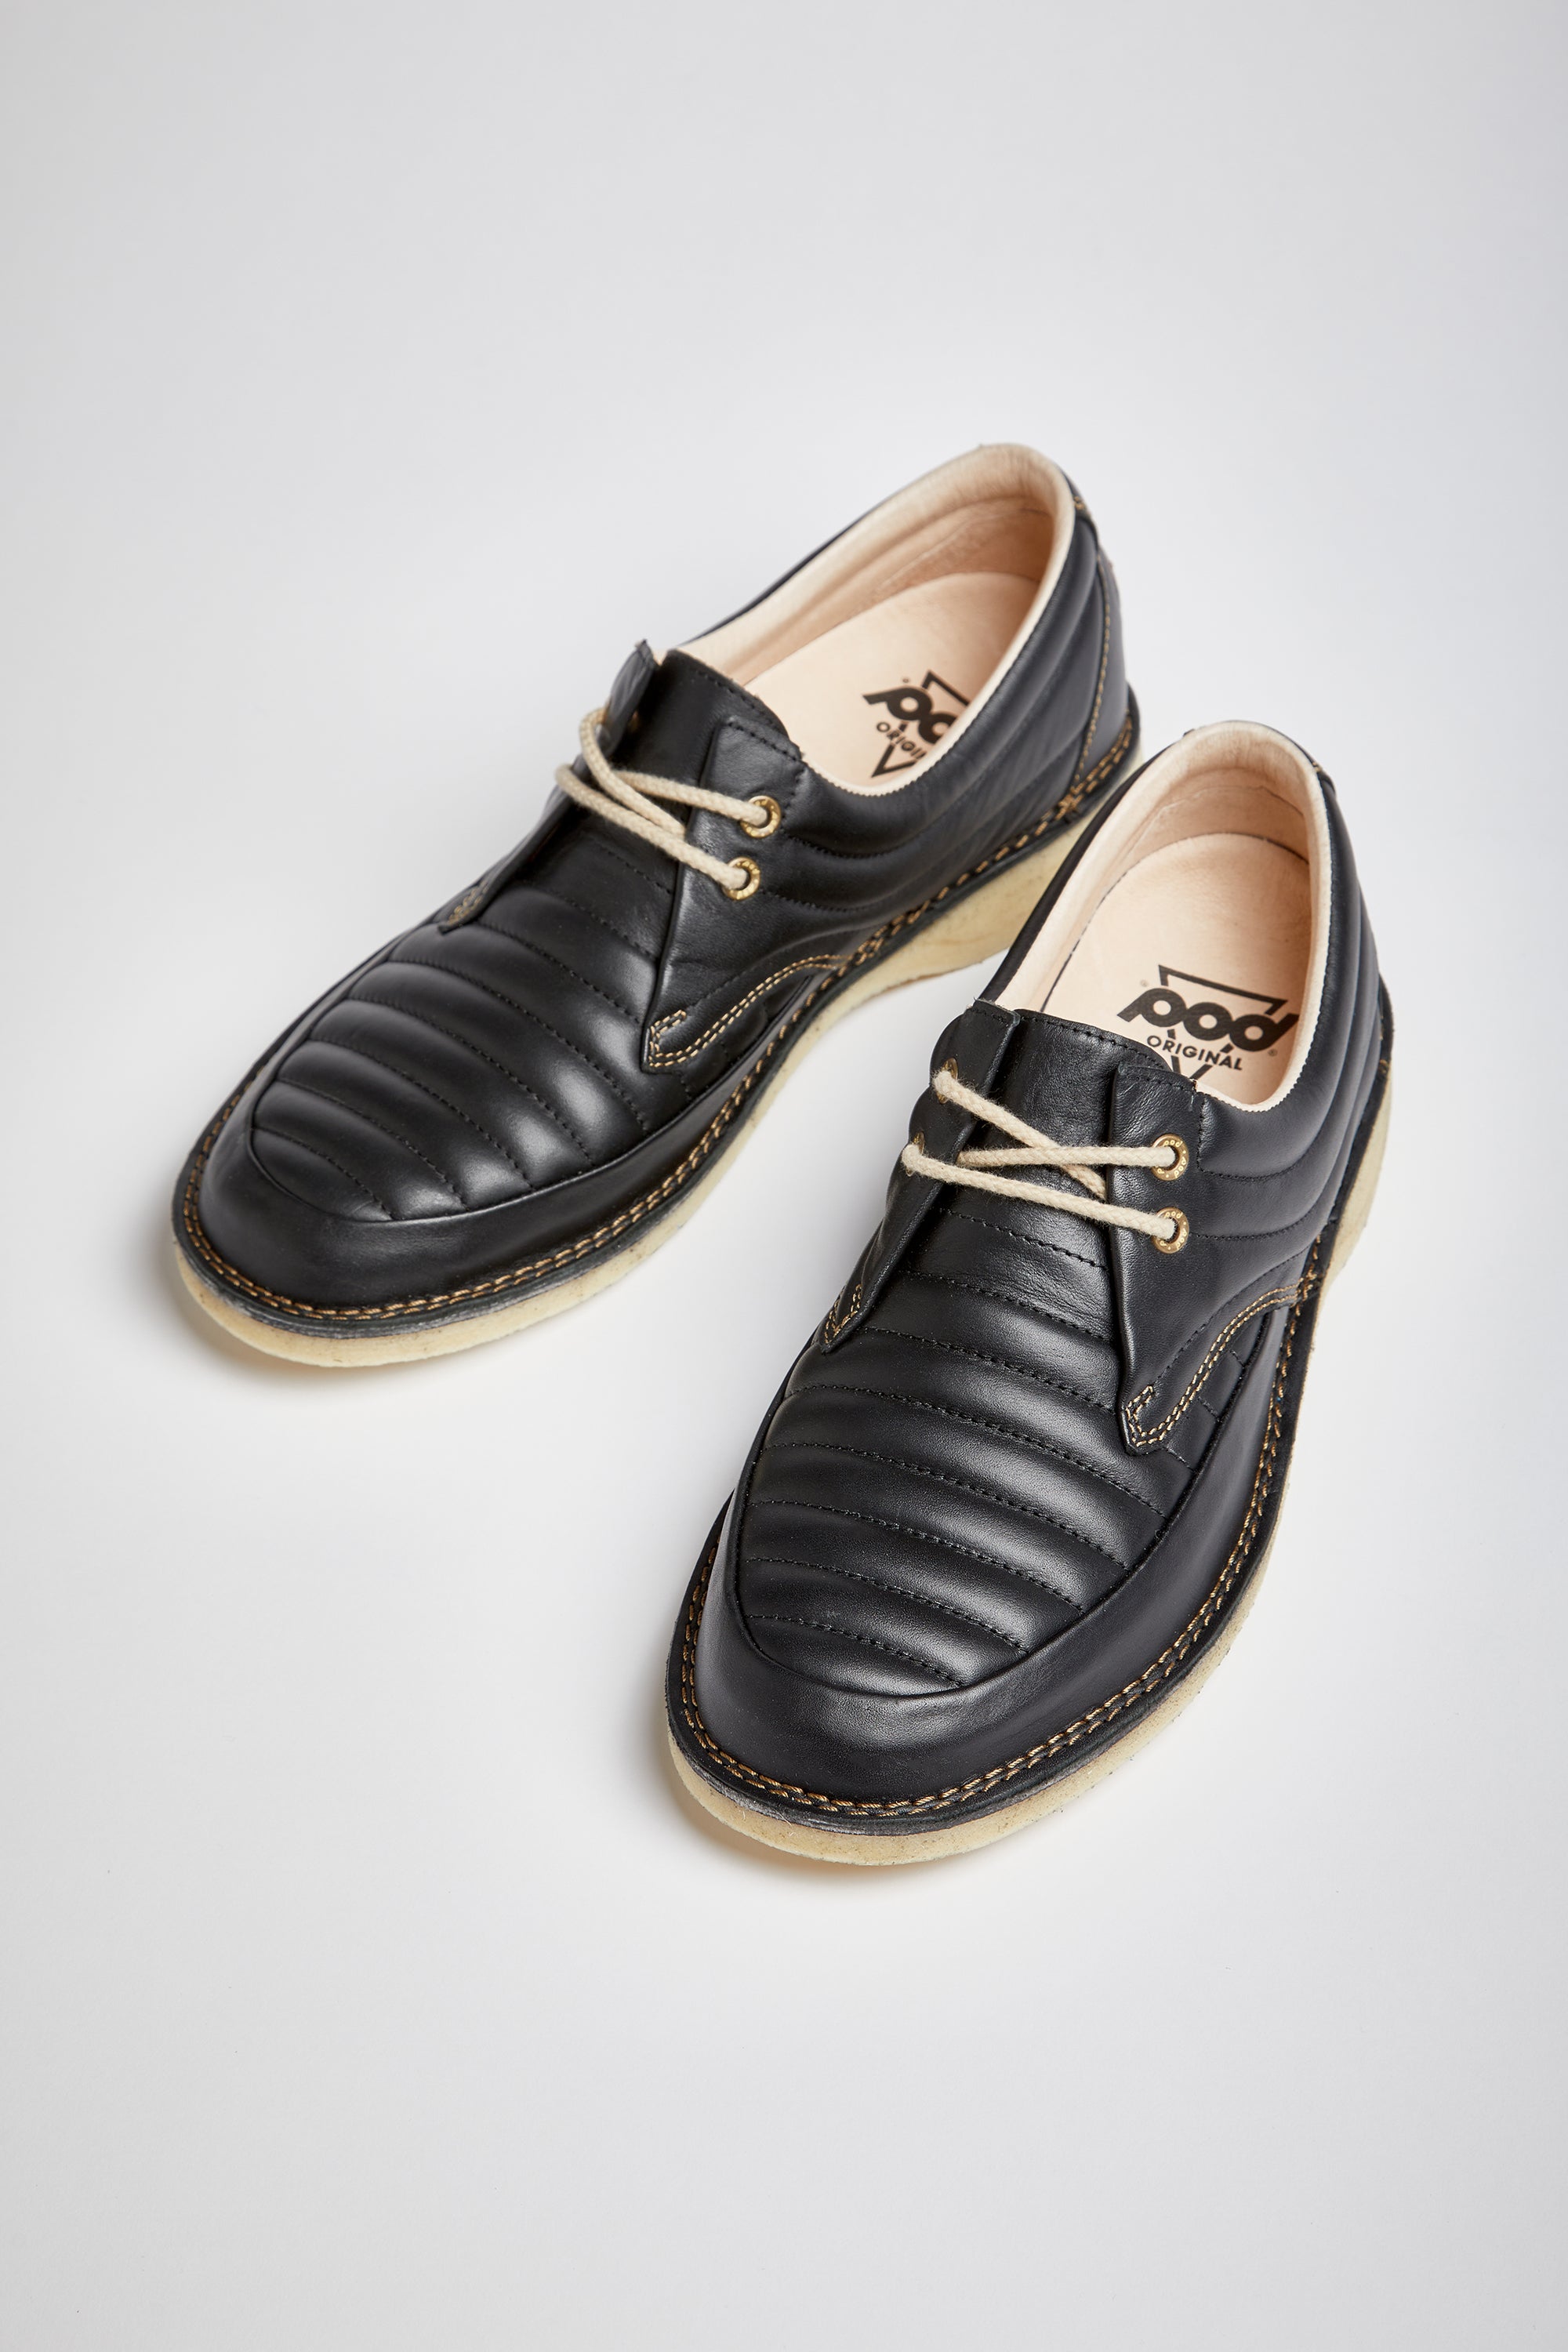 JAGGER LEATHER LACE UP SHOES